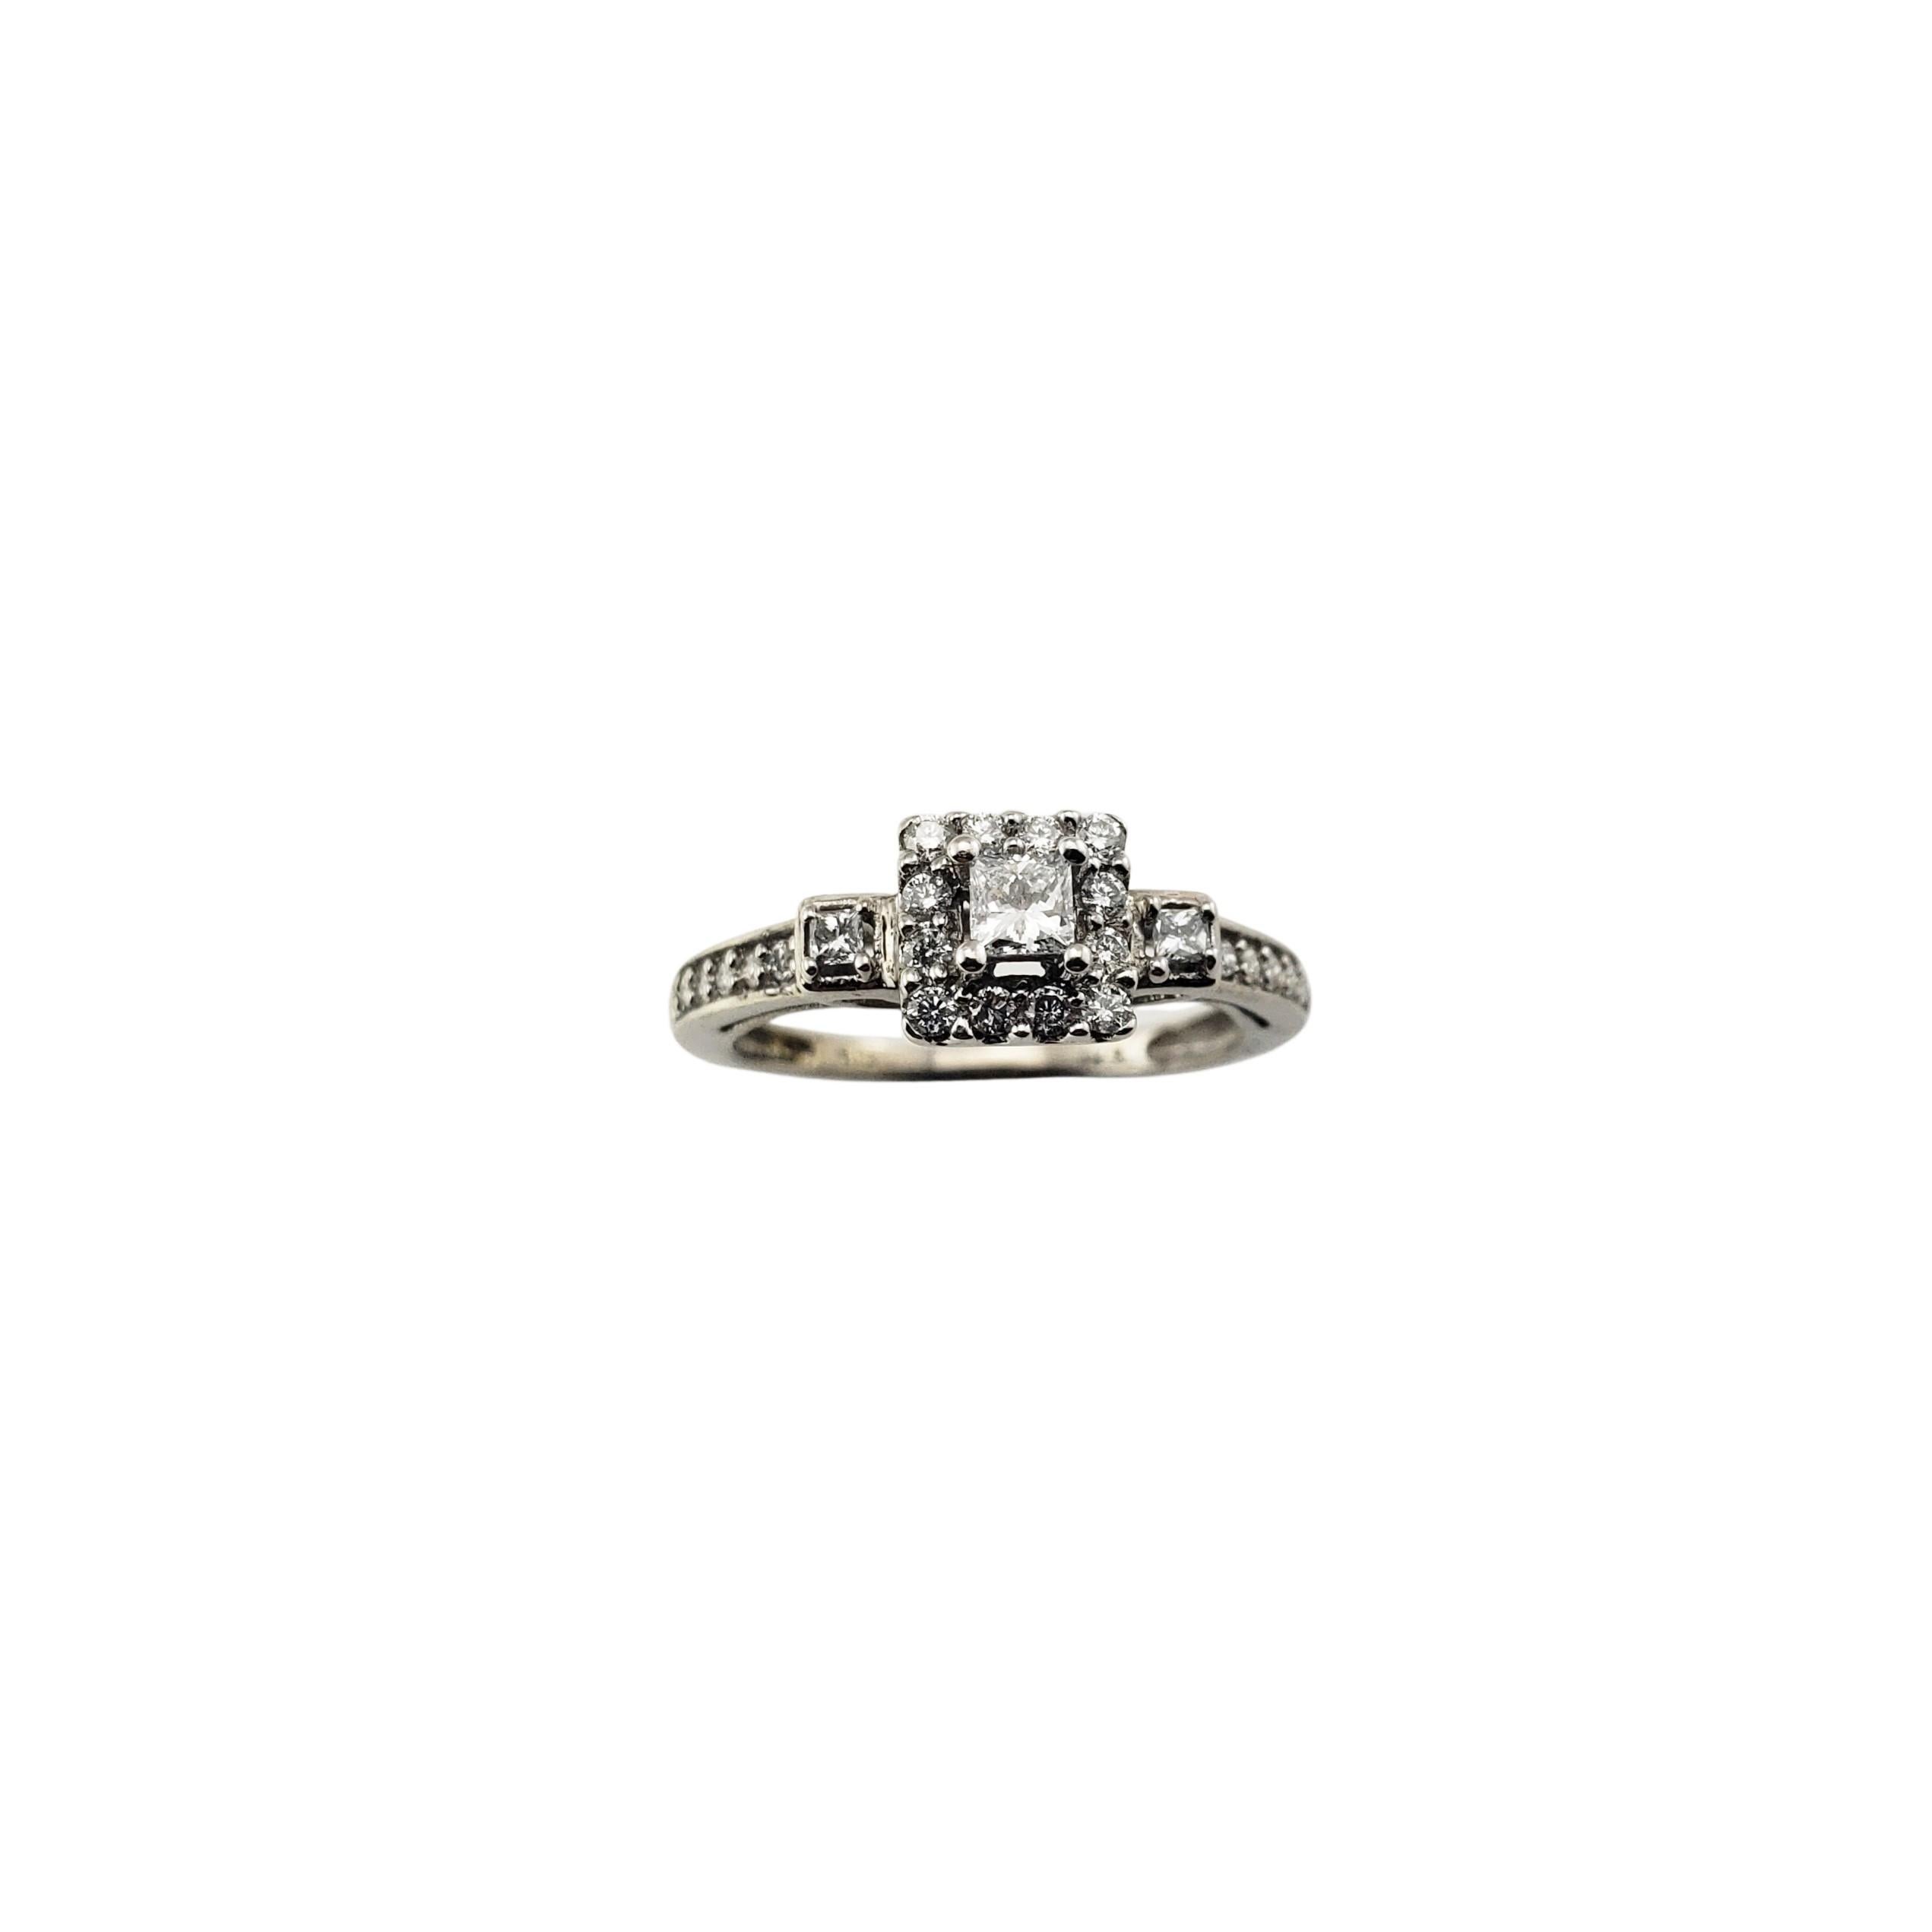 10 Karat White Gold Diamond Engagement Ring Size 5.5-

This sparkling ring features three princess cut diamonds (.03 ct., .12 ct., .03 ct.) and 22 round brilliant cut diamonds set in classic 10K white gold.  Width:  7 mm.  Shank:  1.5